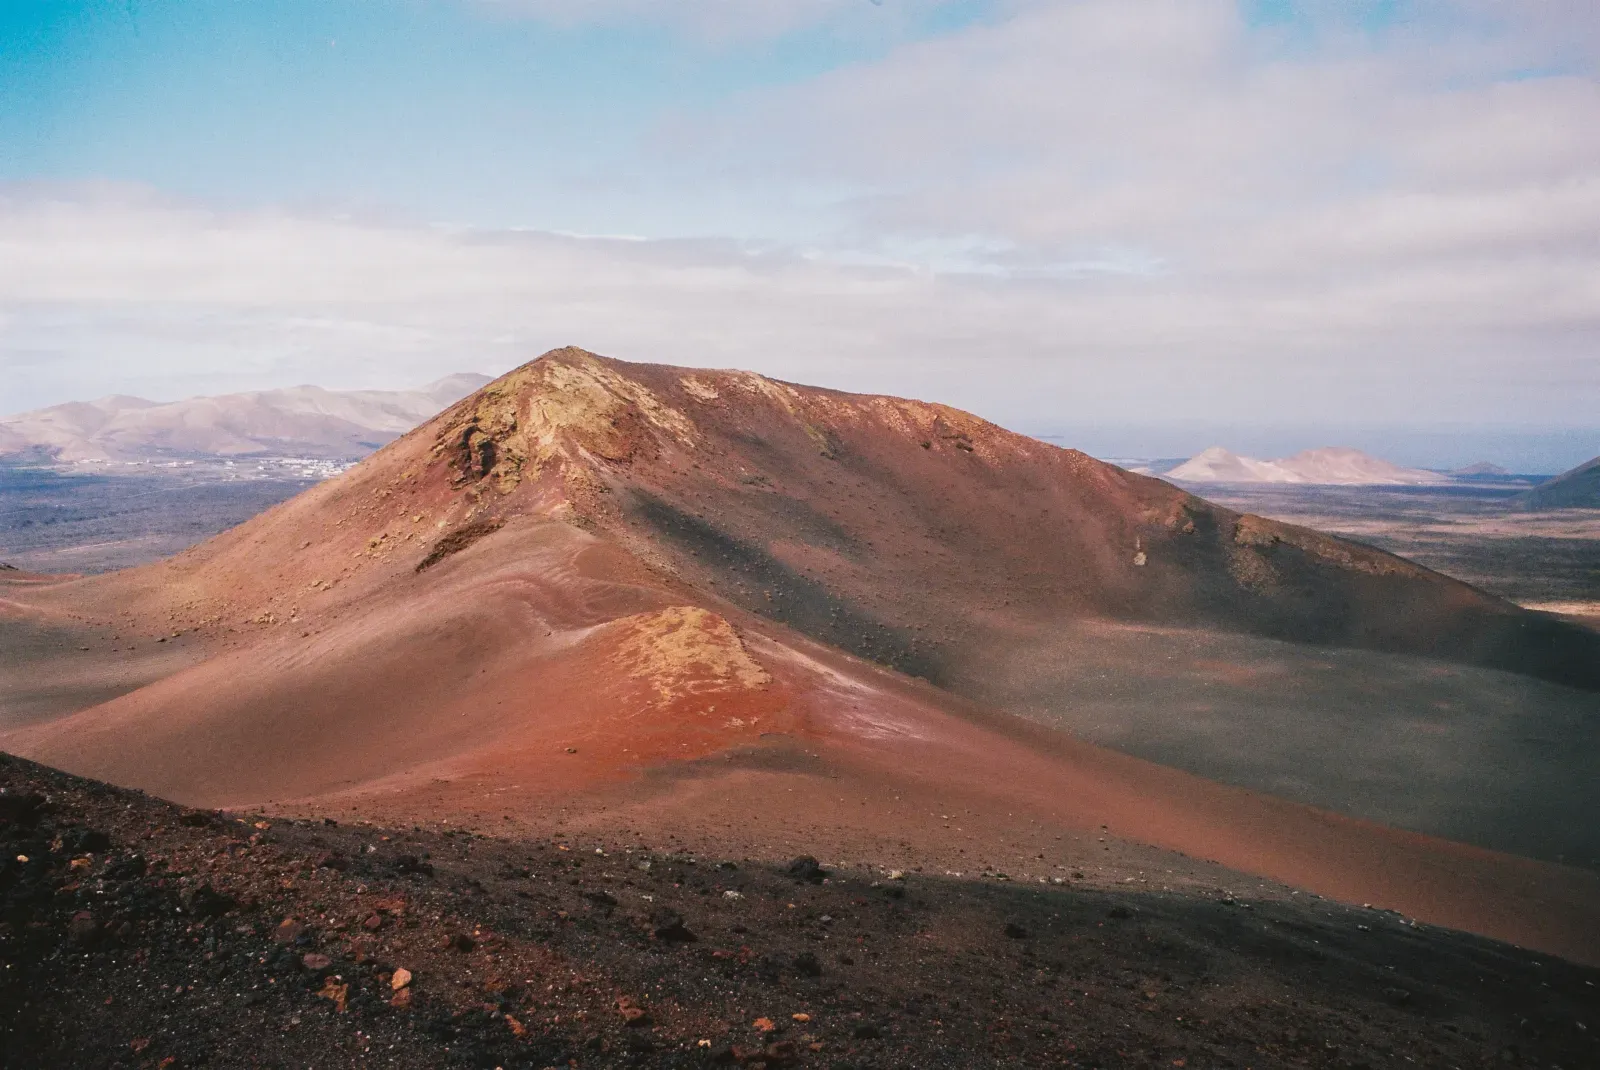 Volcanic mountain in Lanzarote, Canary Islands